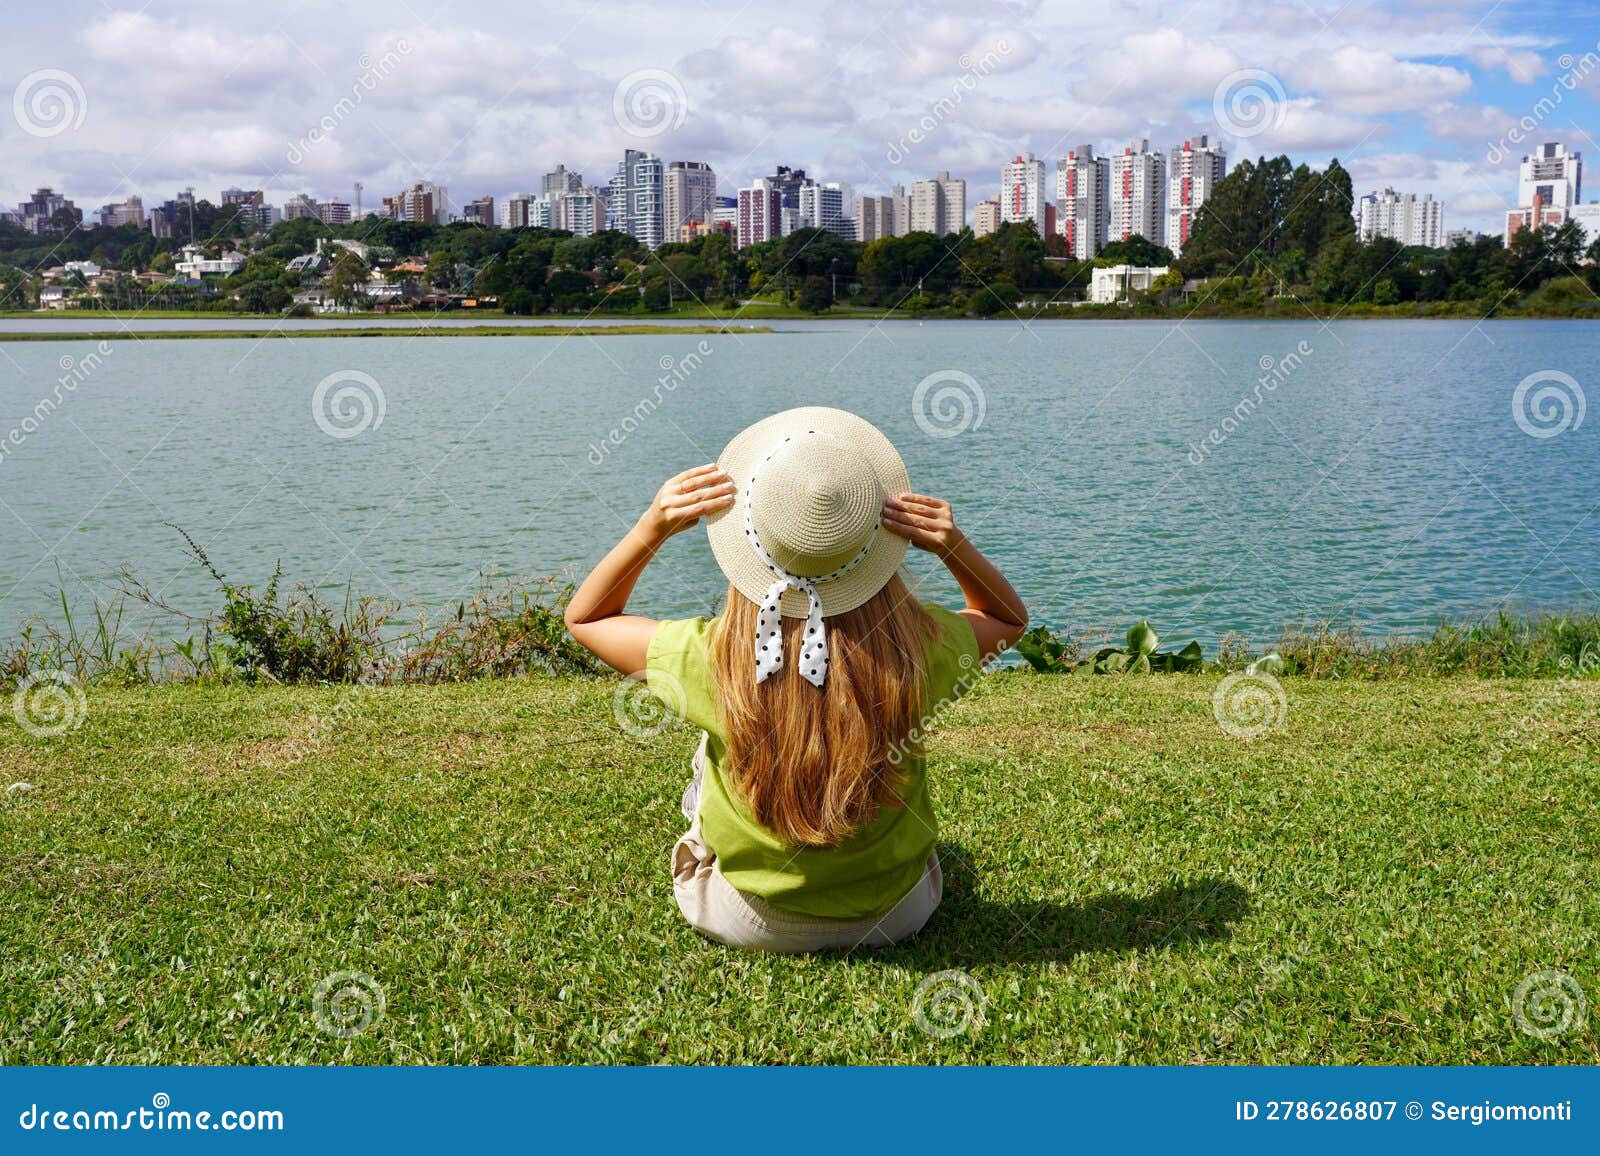 back view of girl with hat sitting on grass in barigui park, curitiba, brazil